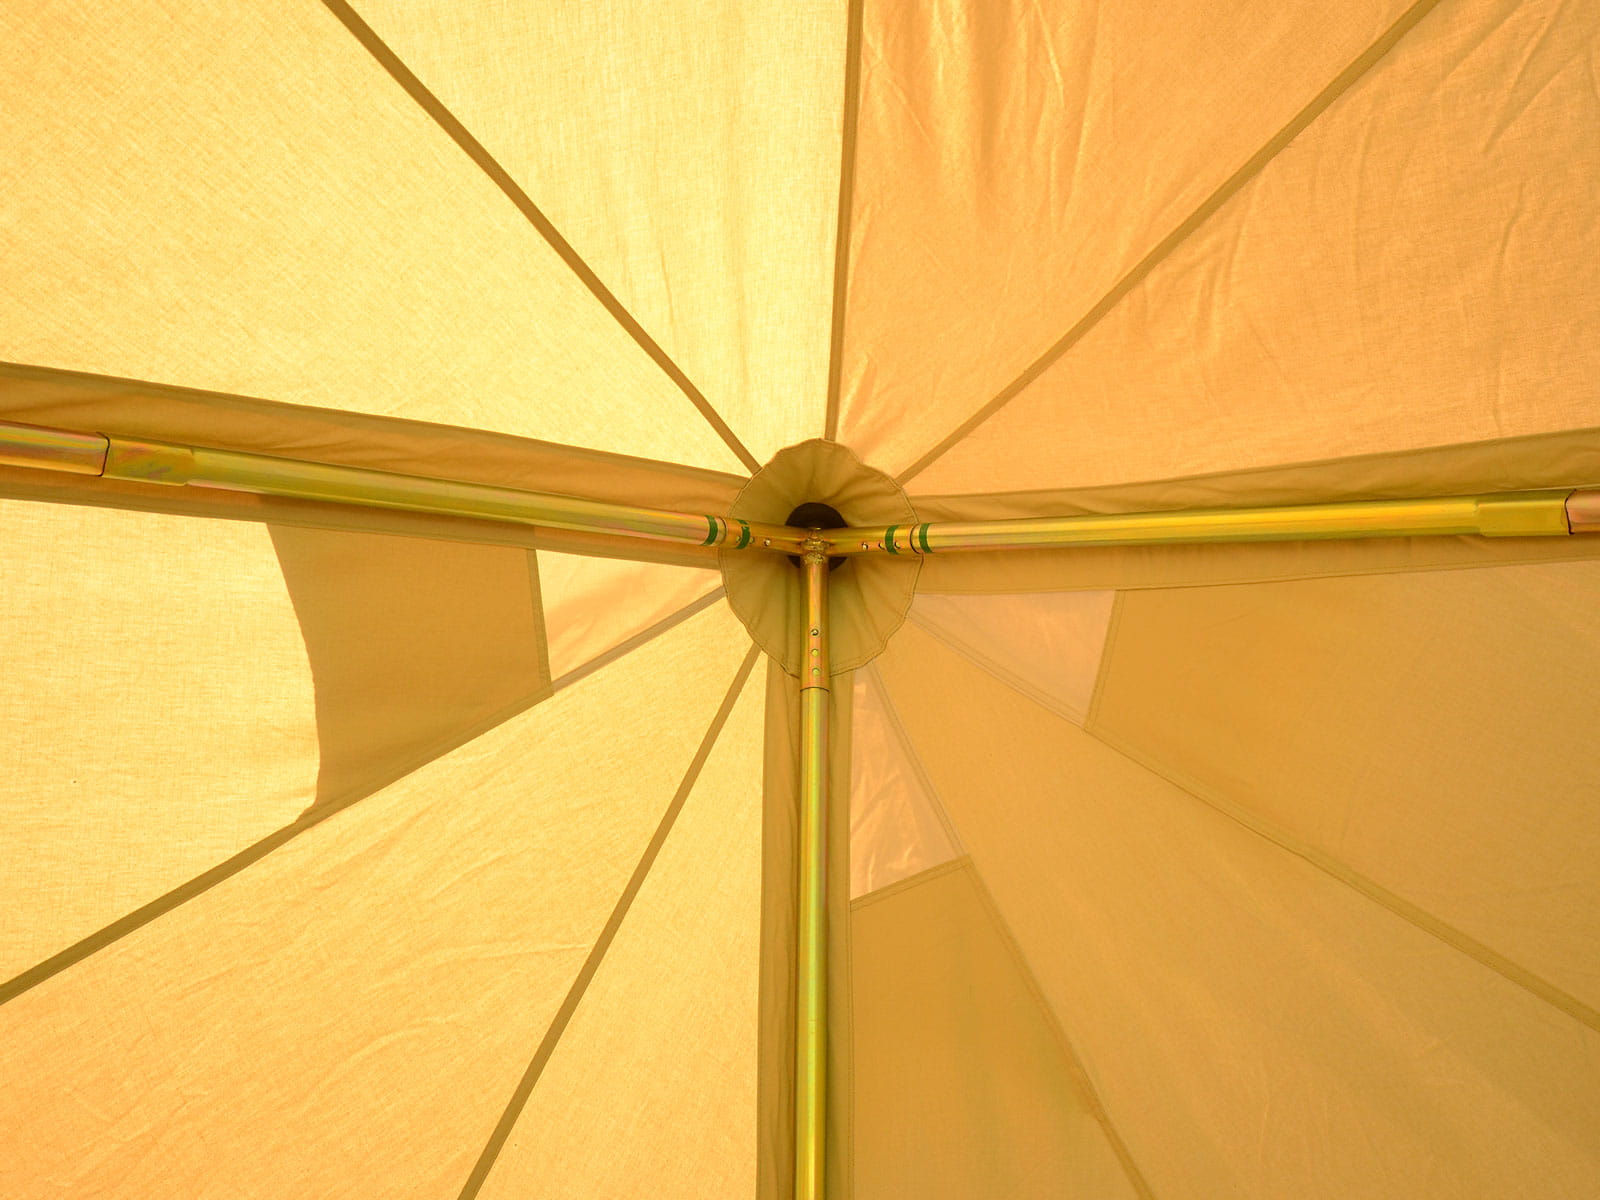 Tripod pole crown and ceiling feature in a 3m standard bell tent.